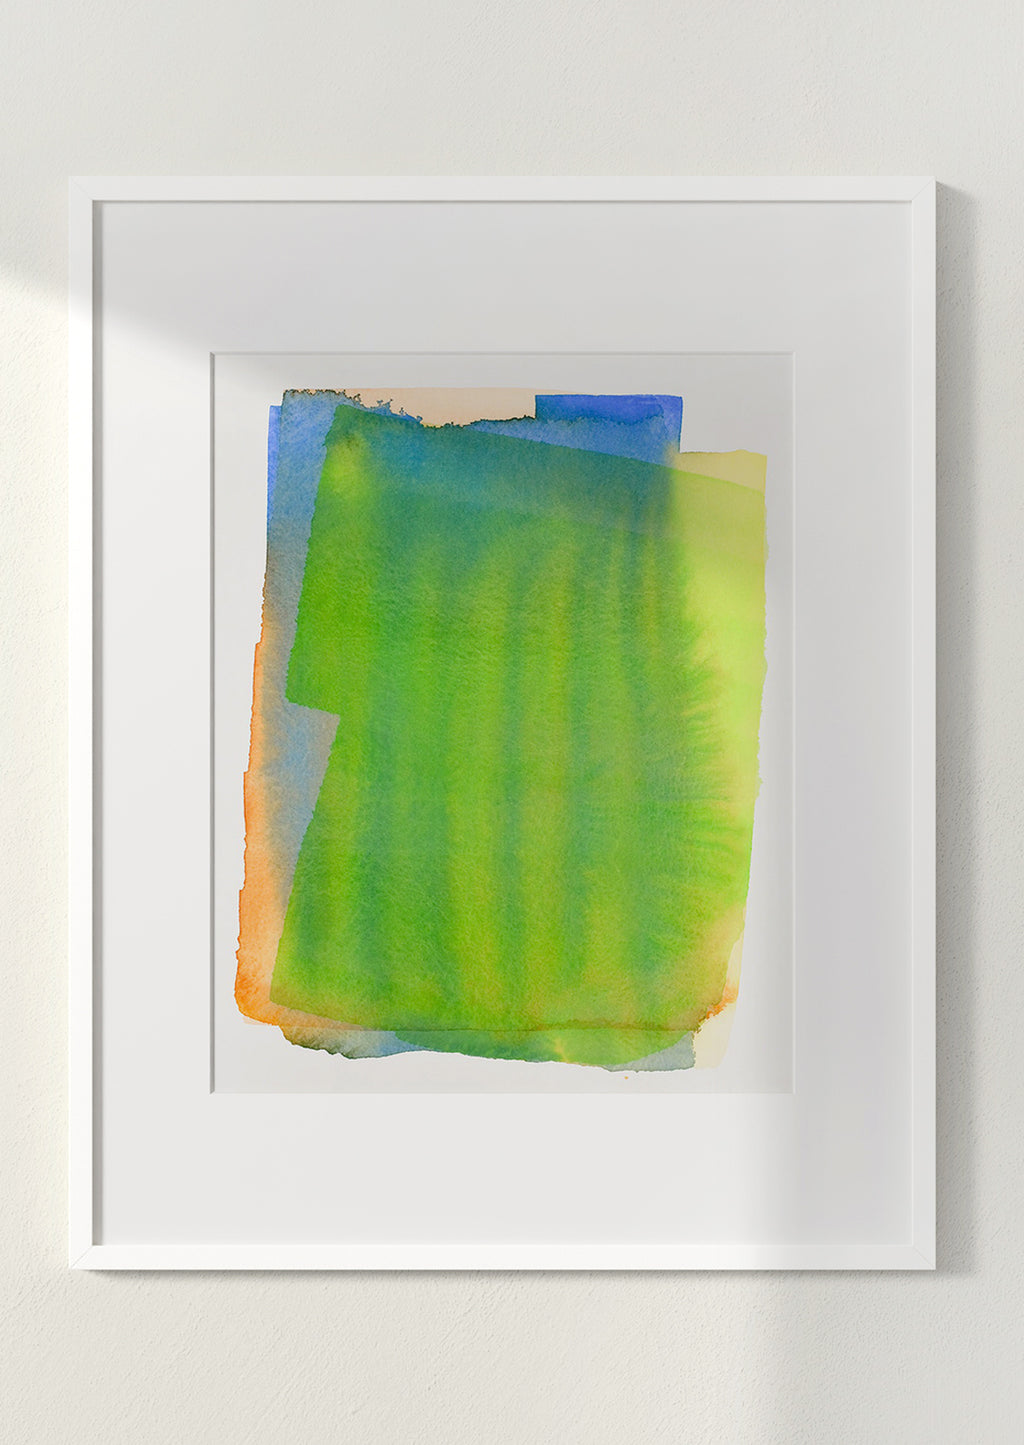 2: Art print of a watercolor abstract form in green, yellow, blue and orange, in white frame.